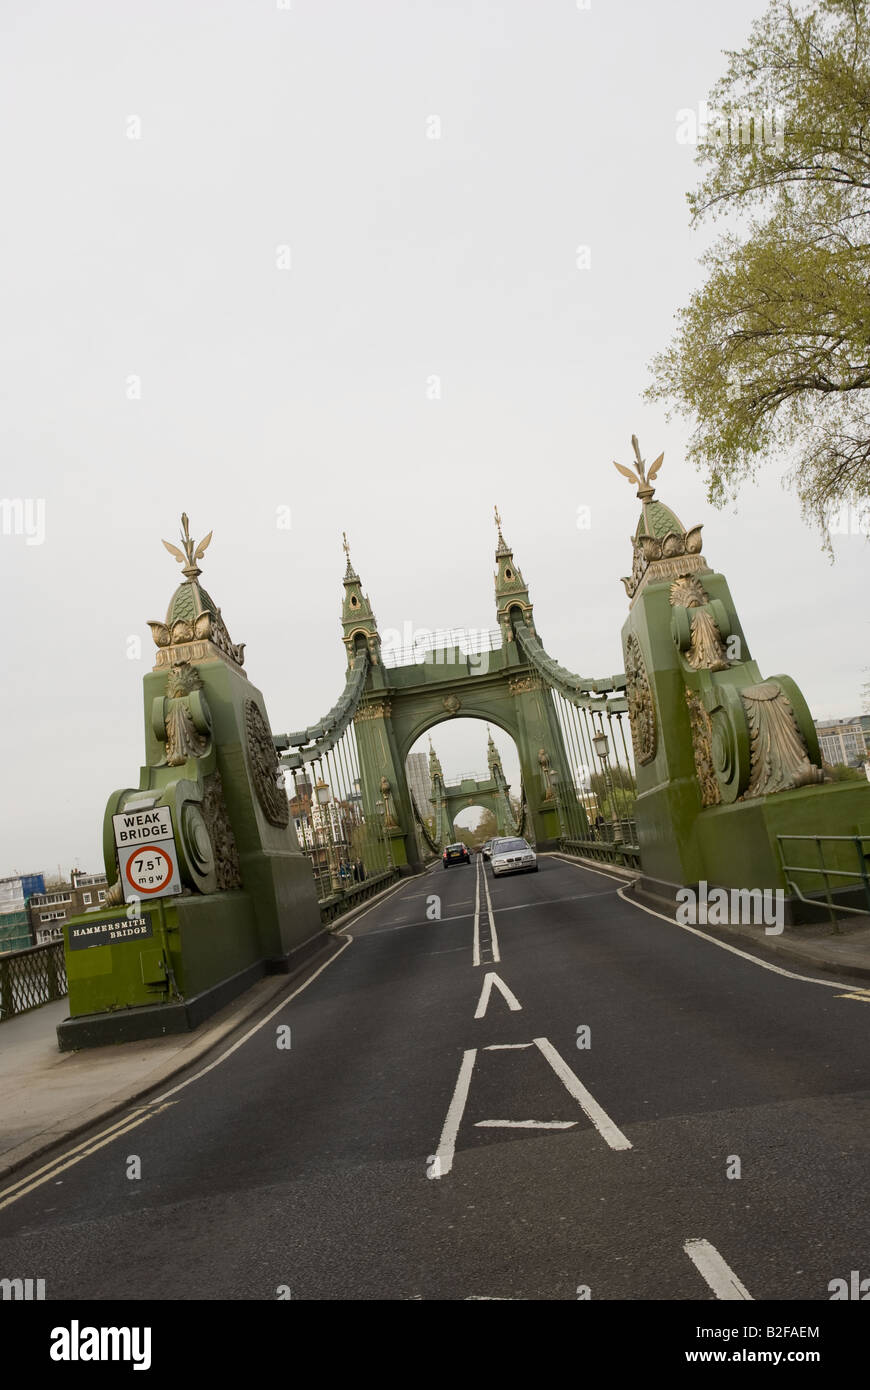 The approach to Hammersmith Bridge in London. Stock Photo